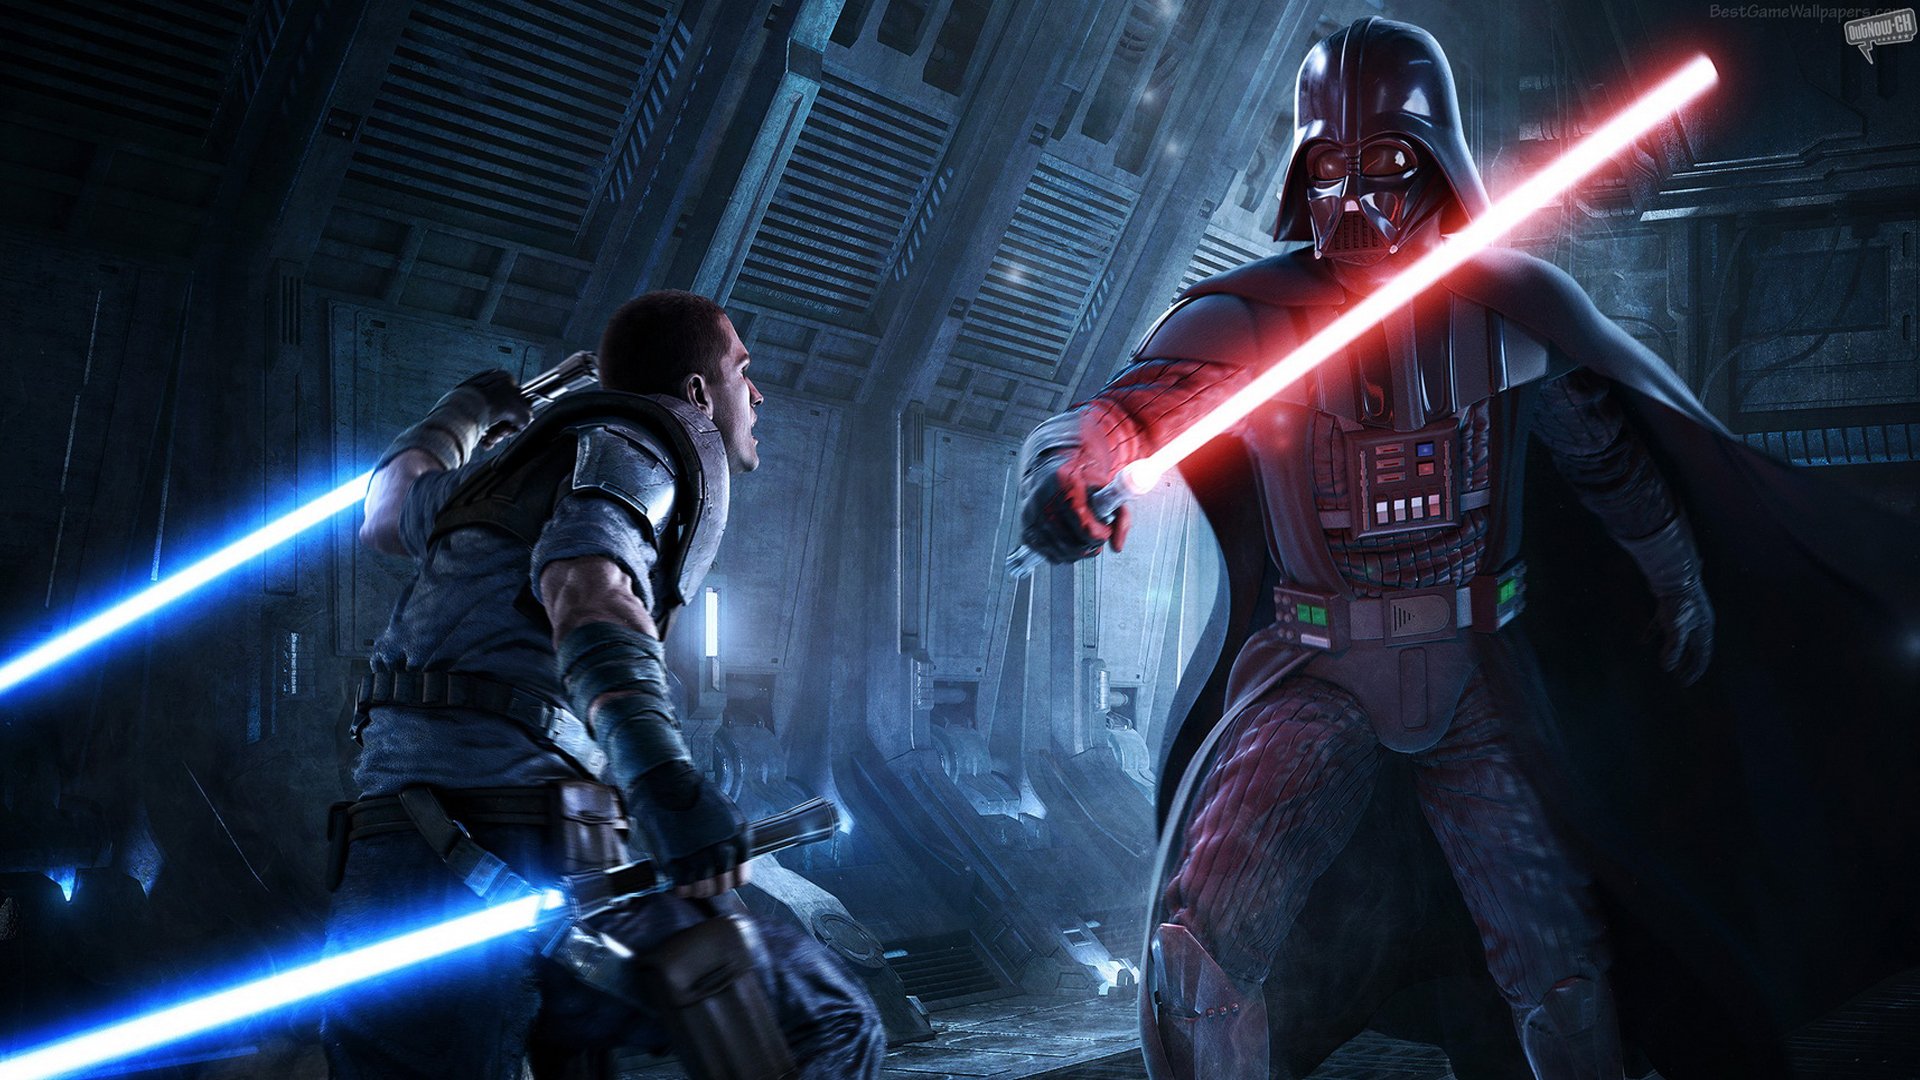 star, Wars, Force, Unleashed, Sci fi, Futuristic, Action, Fighting, Warrior, 1swfu, Darth, Vader Wallpaper